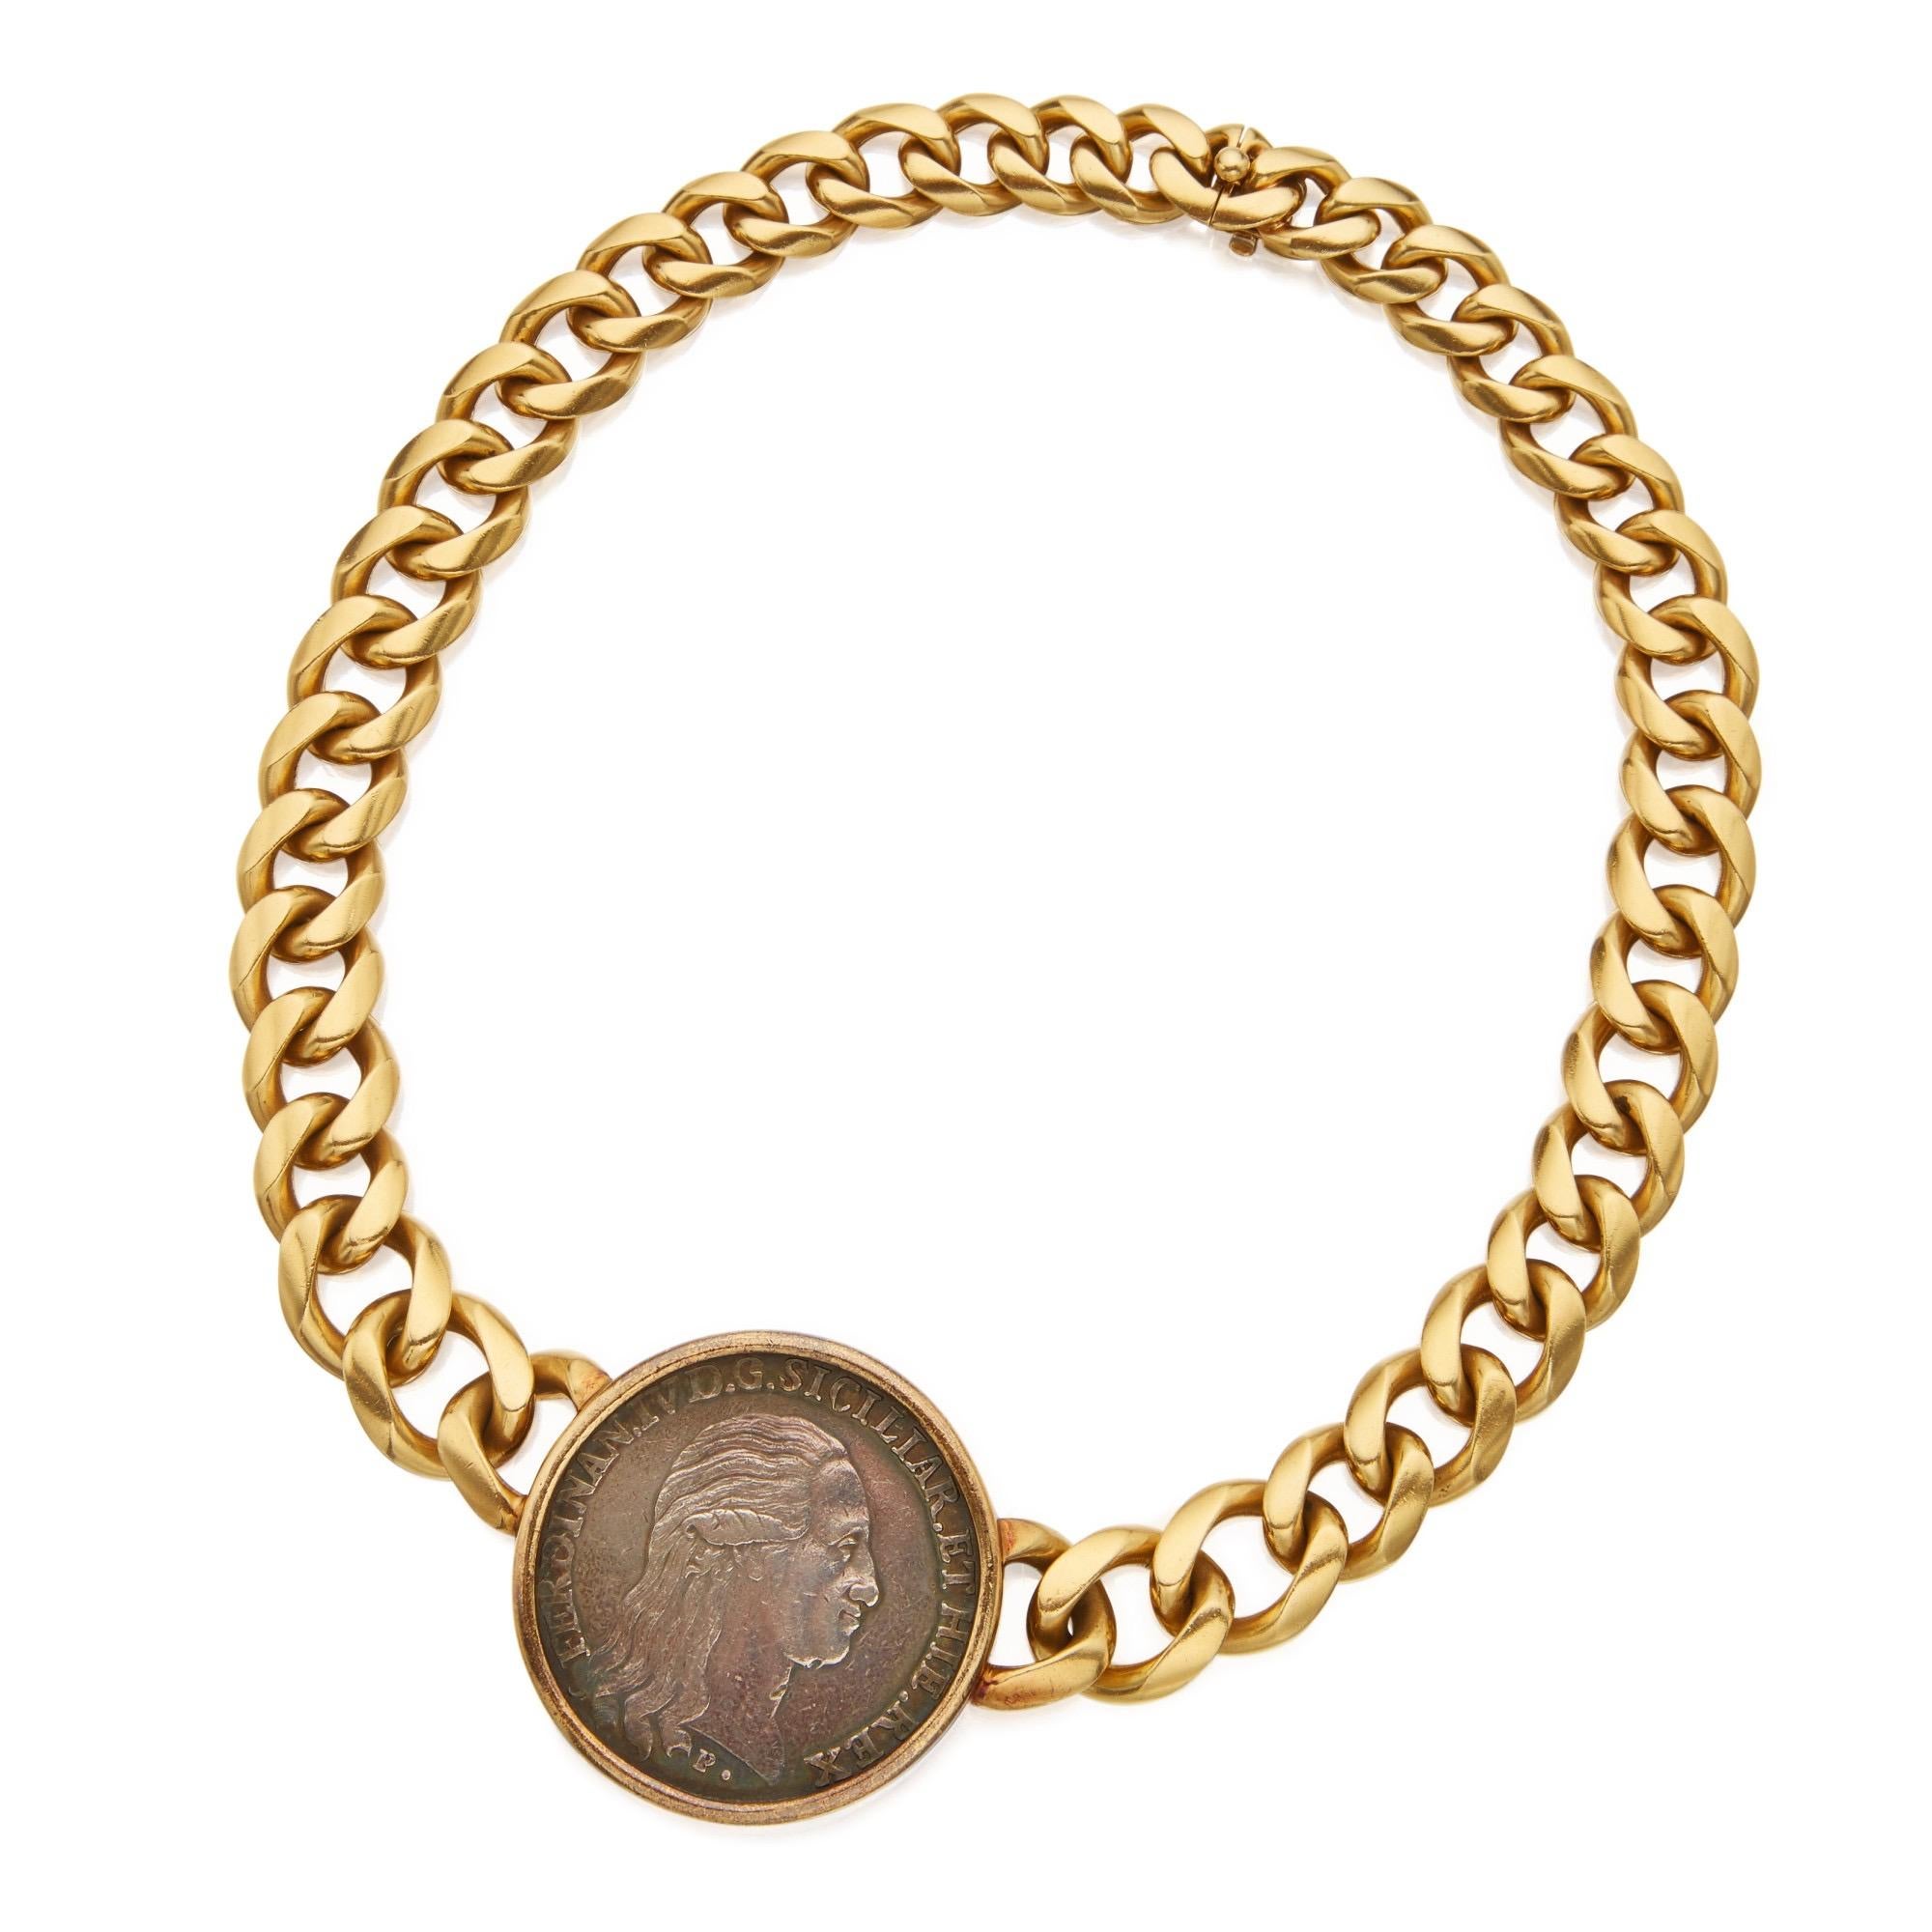 A Bulgari Monete 18 karat yellow gold curb link chain necklace featuring a large silver coin dated 1790, depicting Ferdinand IV/III, the King of Naples and Sicily, on the front. The reverse depicts the royal Coat of Arms during the King’s reign from